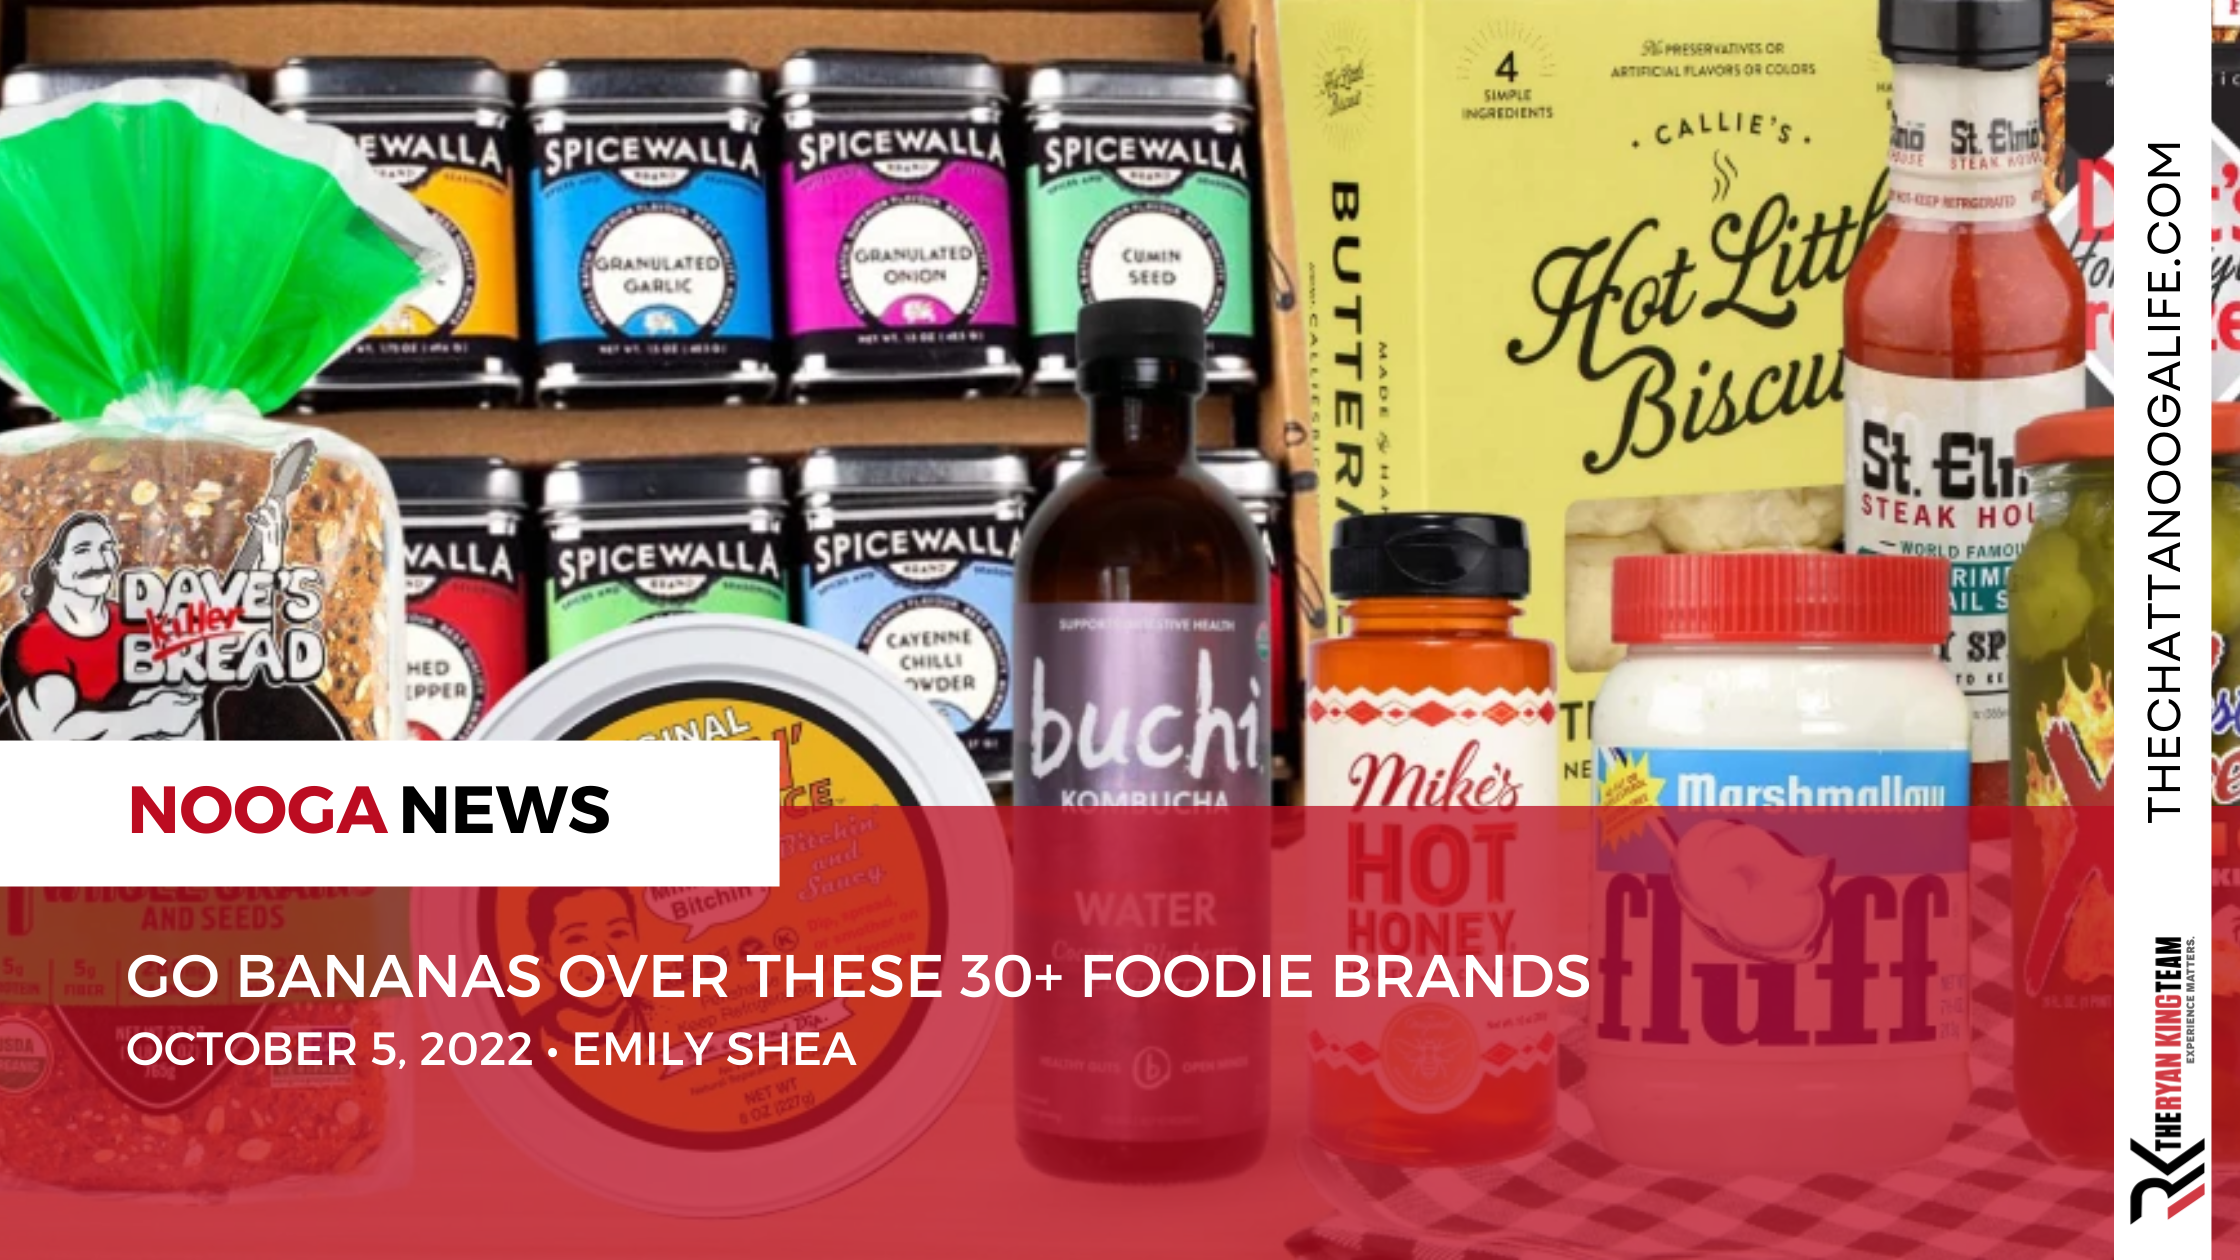 Go Bananas Over These 30+ Foodie Brands